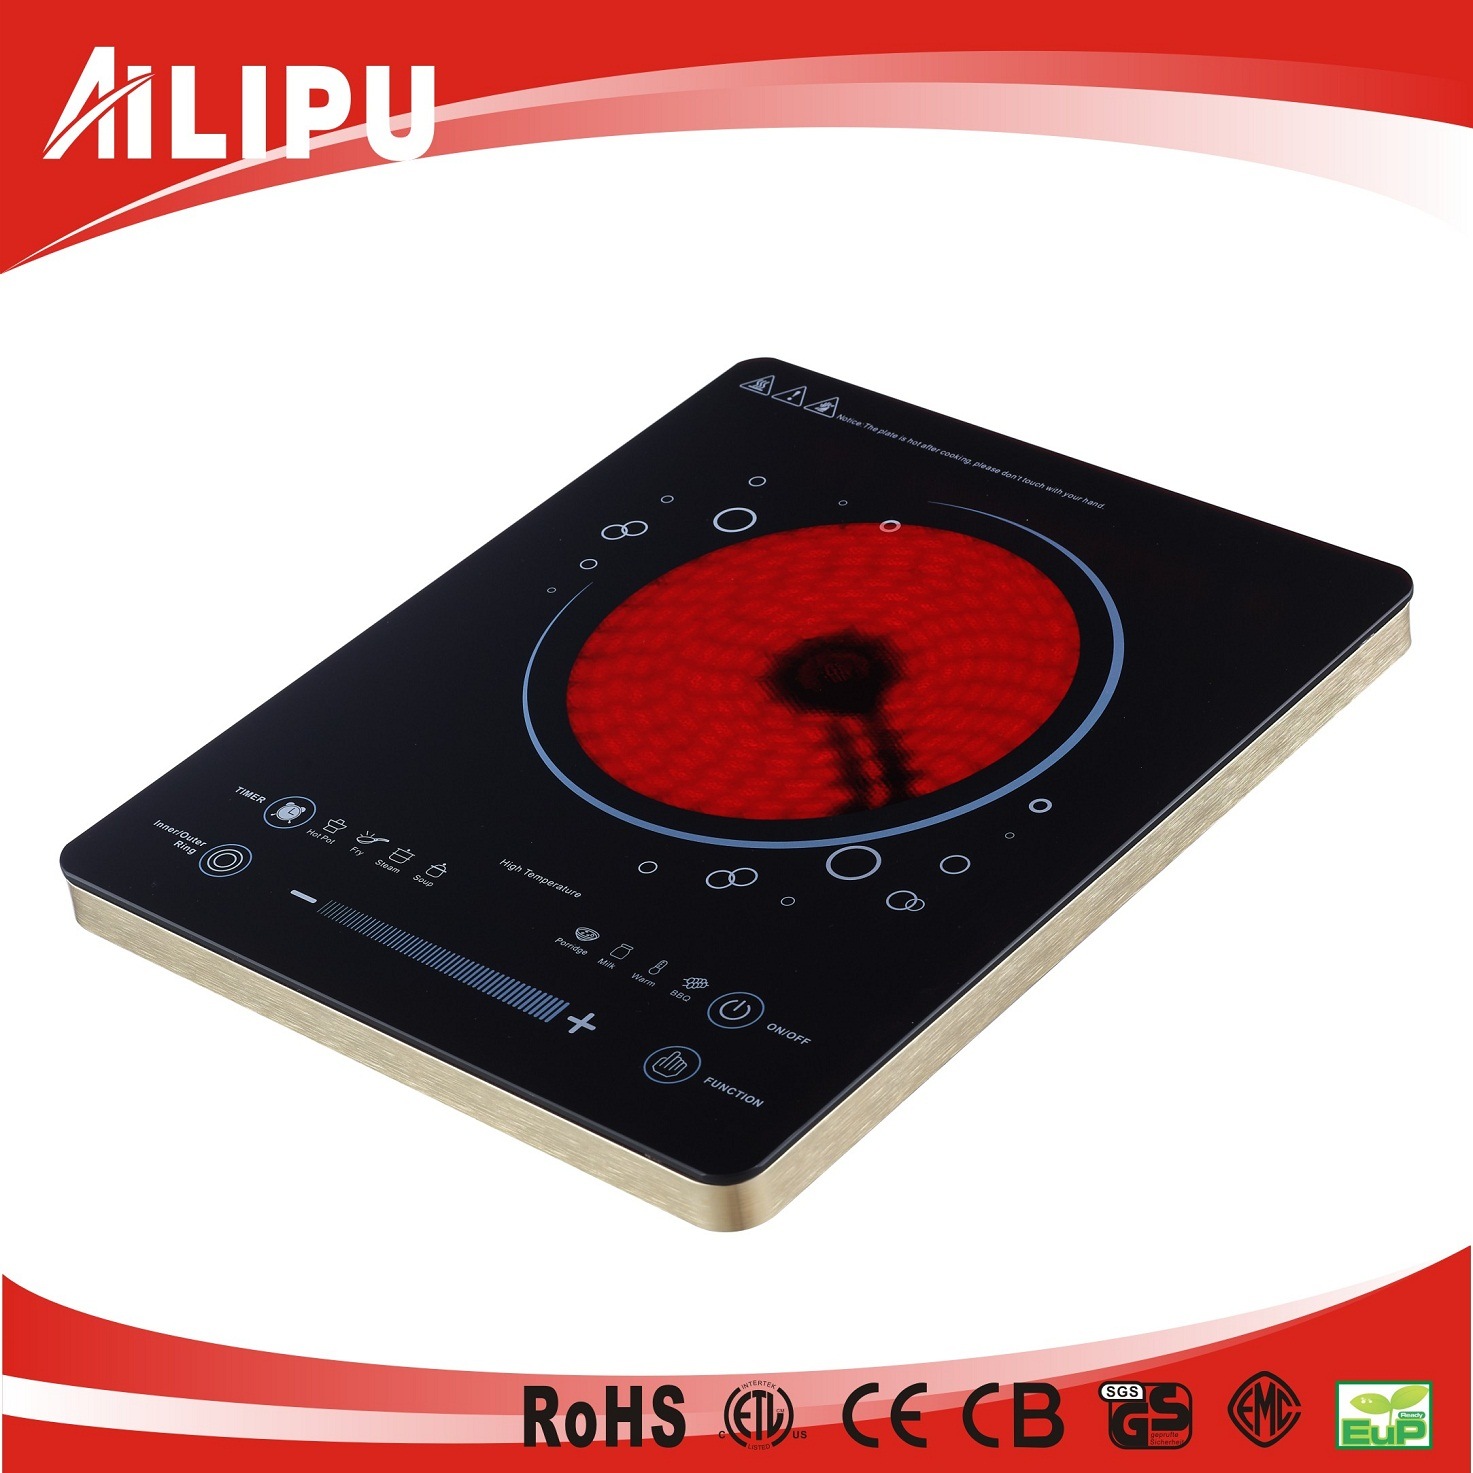 CE, CB, EMC Certificate, 2015 Home Appliance, Hot Product for Kitchenware, Infrared Heater, Stove, Ceramic Hob